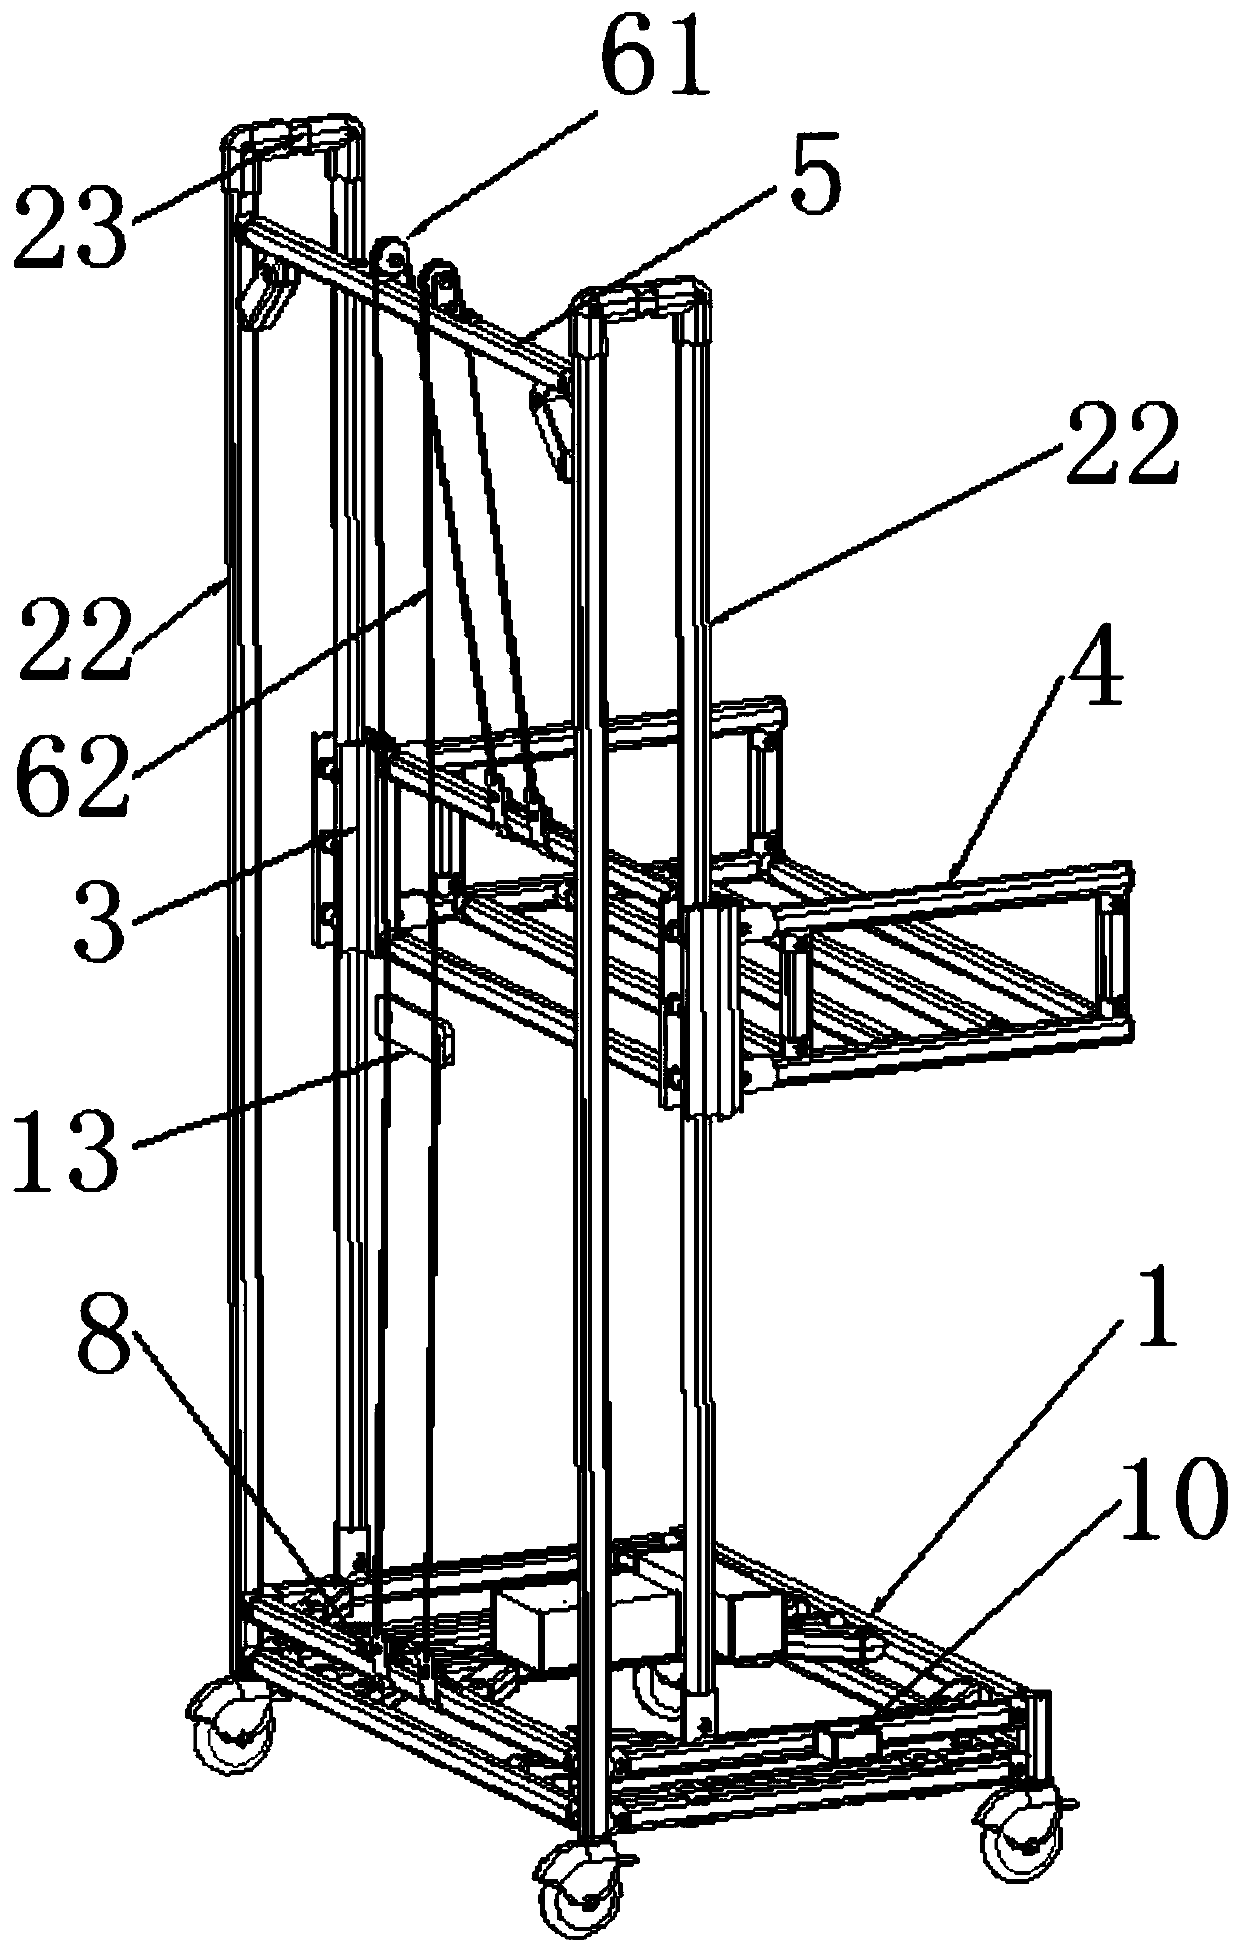 Material turnover device with height automatic to adjust